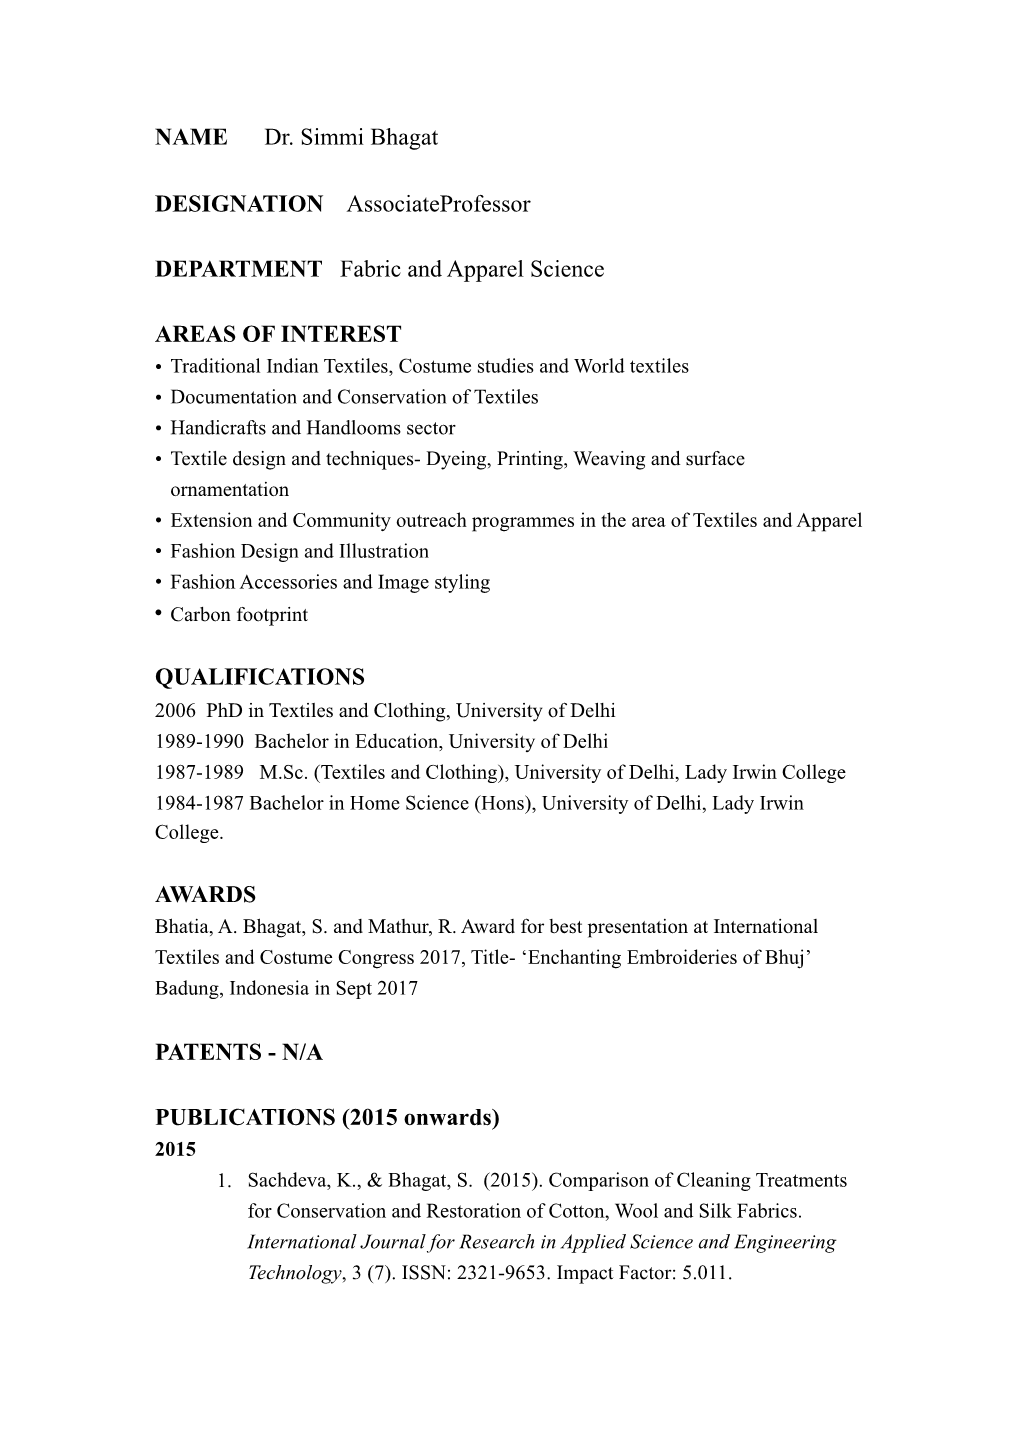 FAS Faculty Profile Template